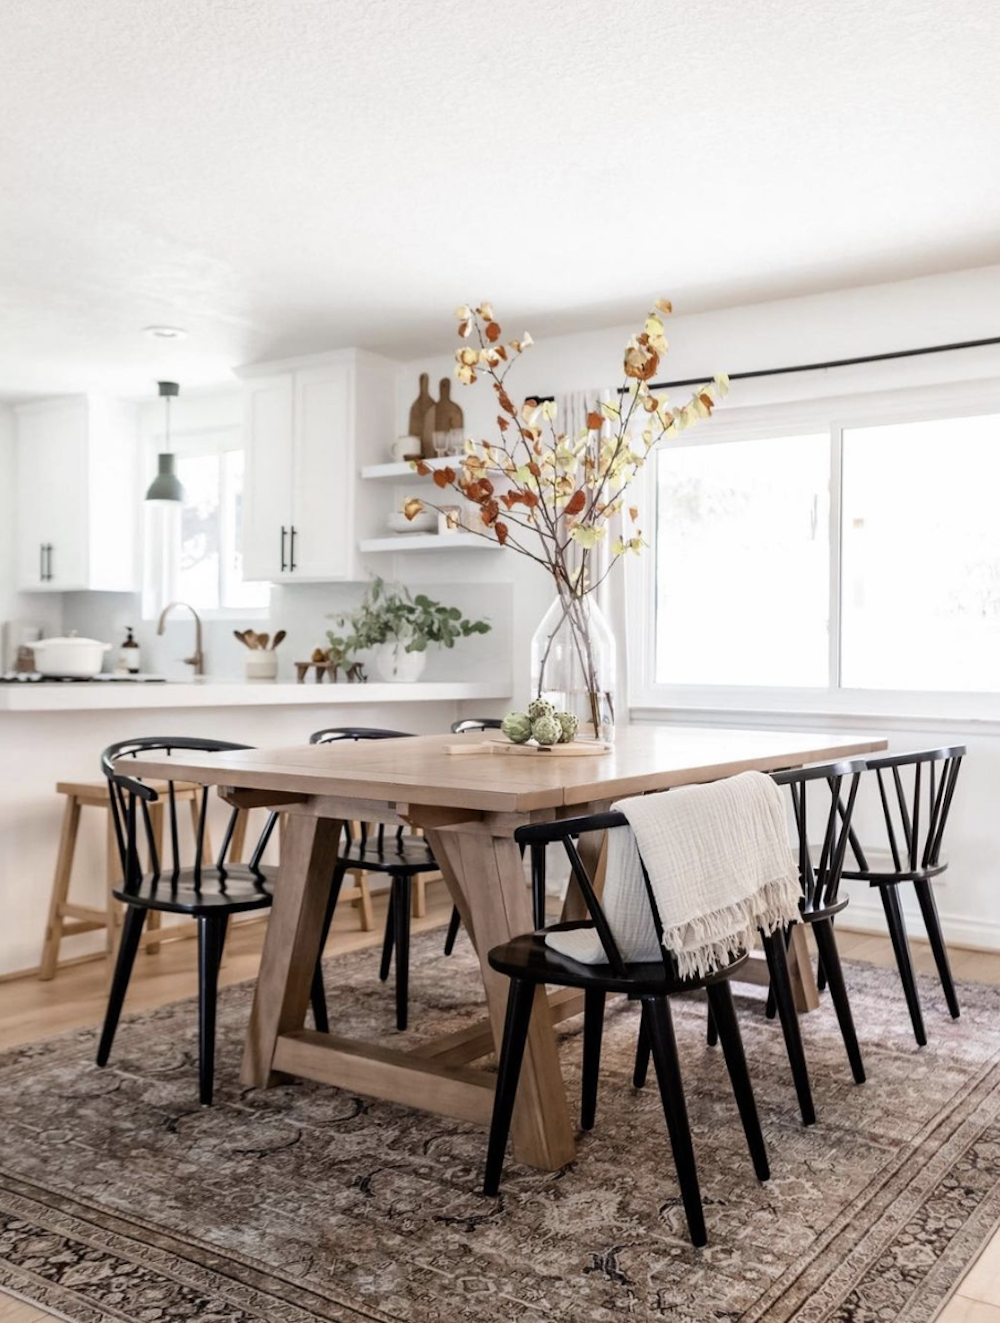 image of a white kitchen and dining area with a wood table and black spindle chairs